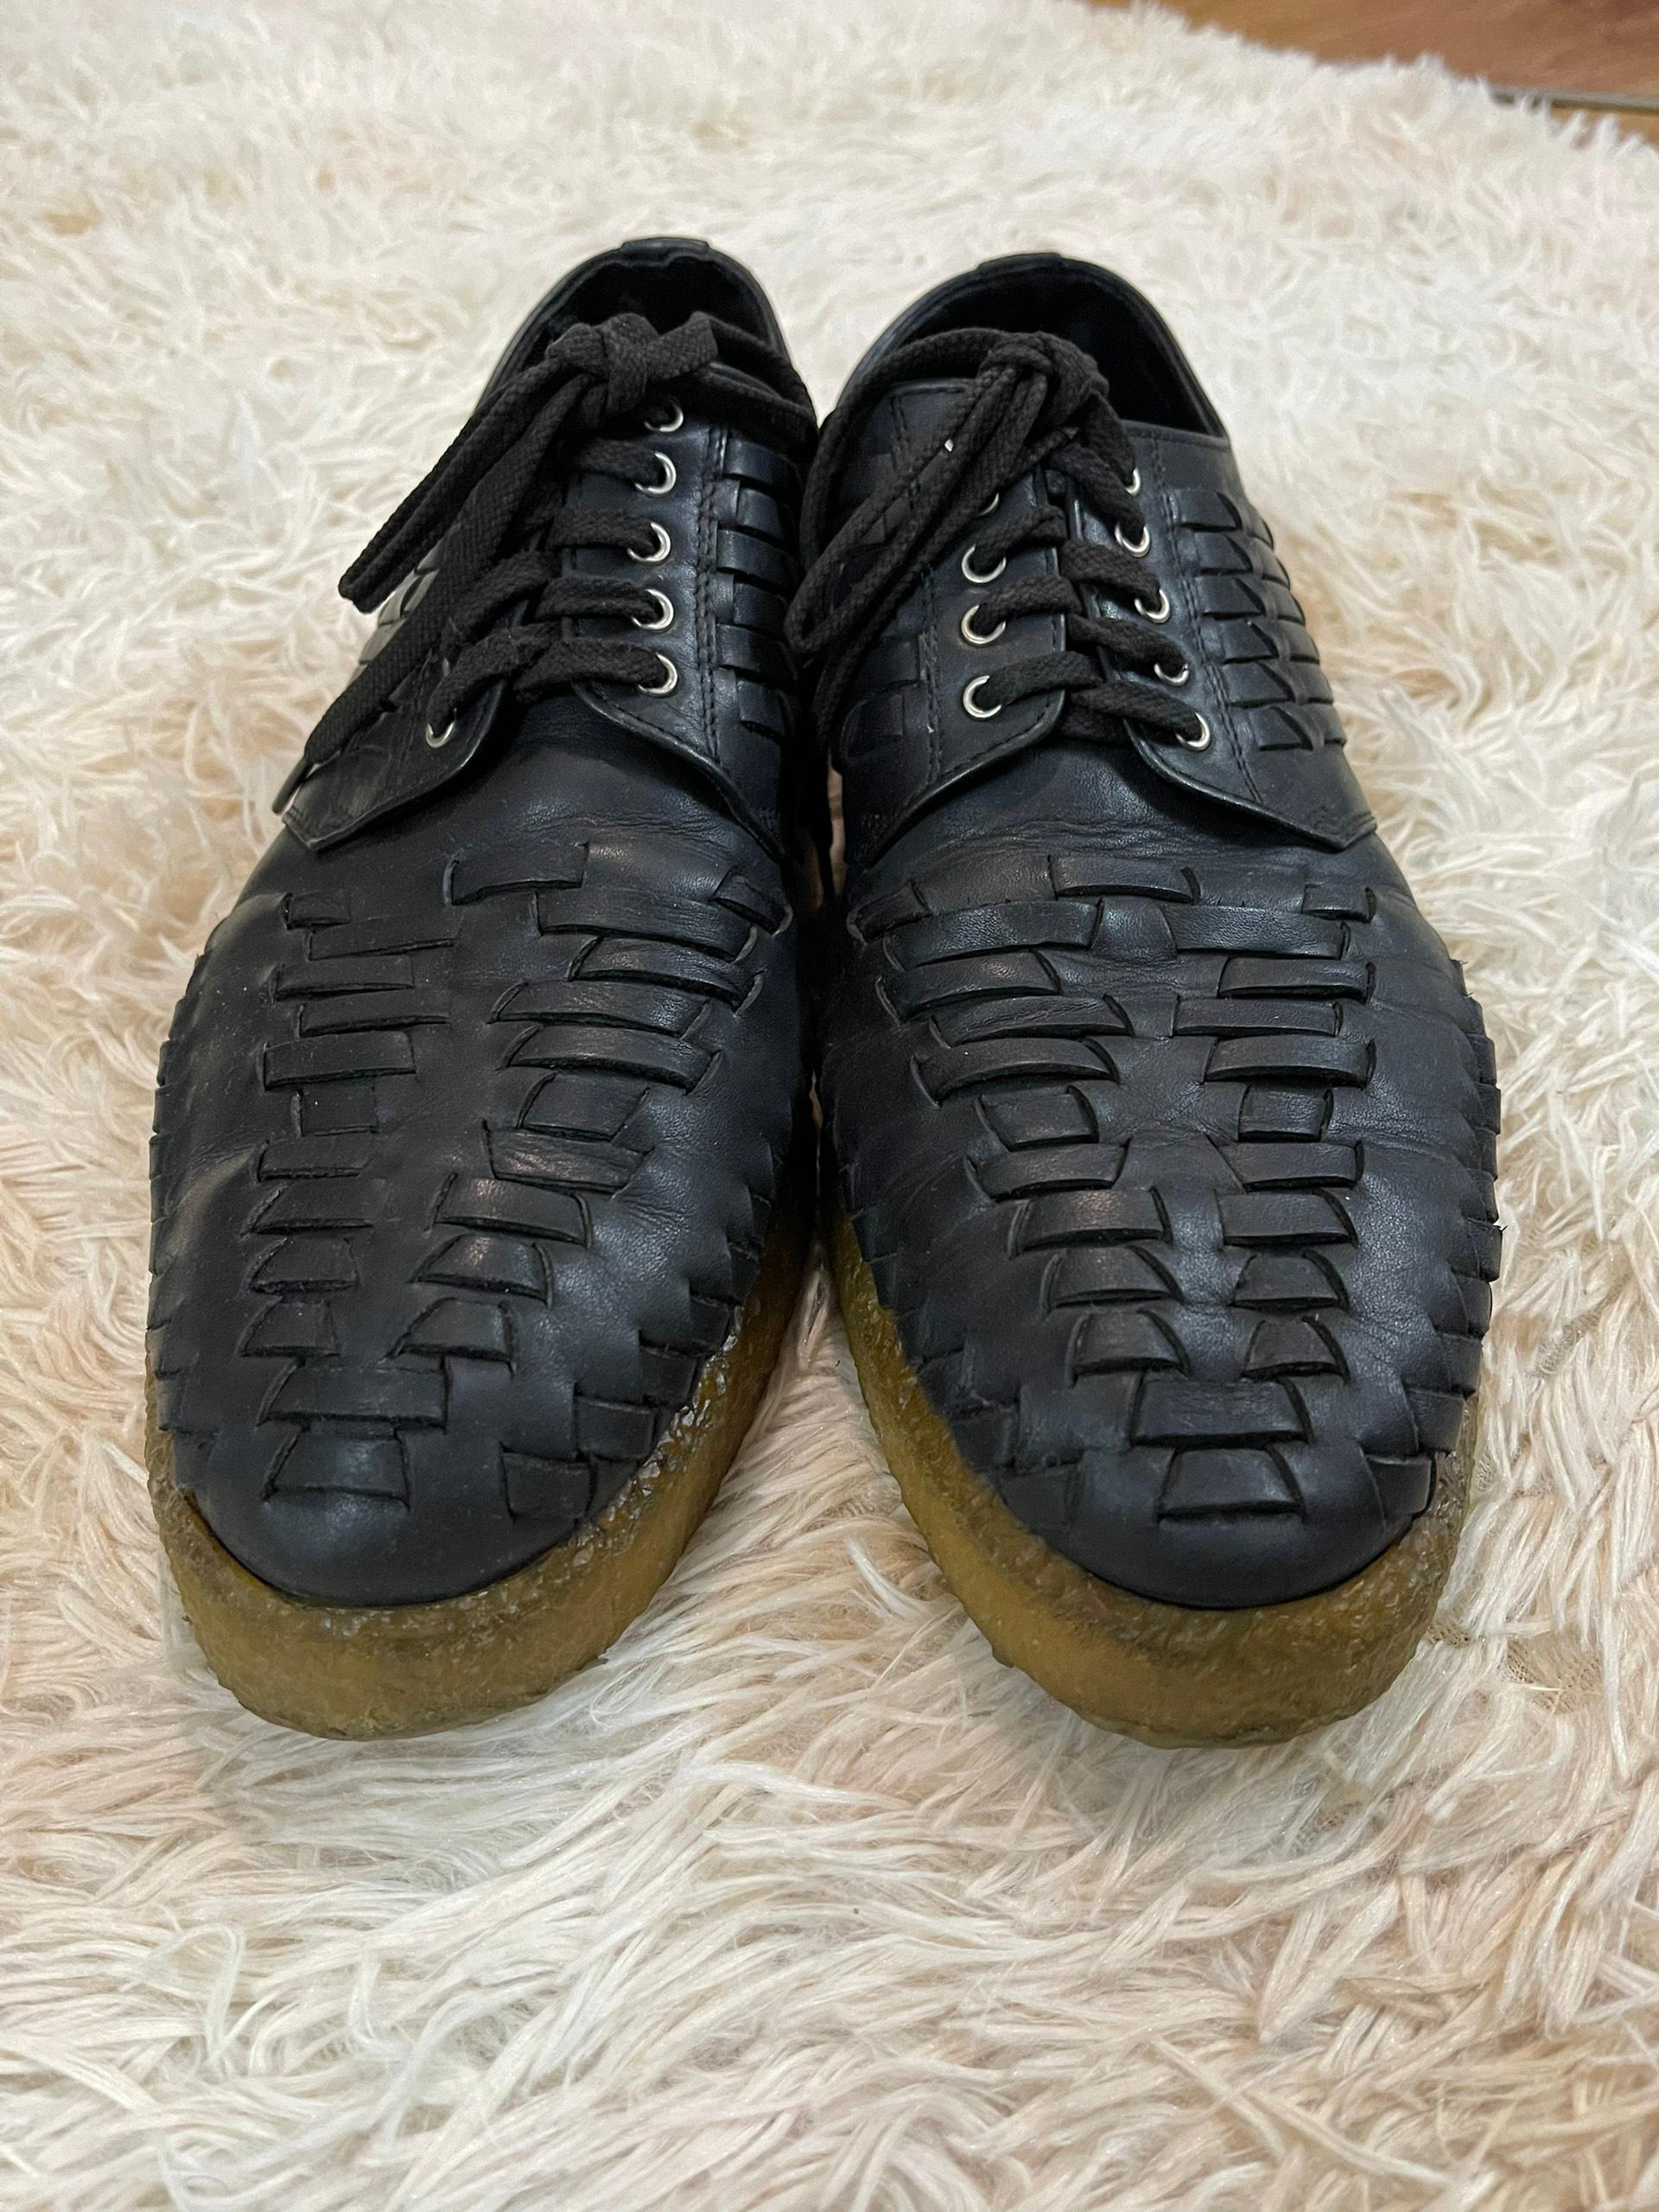 Season unknown, the shoes has a similar pattern to Bottega Veneta's infamous Intrecciato pattern

Size: 43, fits 44.

Condition: 8/10, worn insole.

Feels free to message me with any questions regarding inquiries.